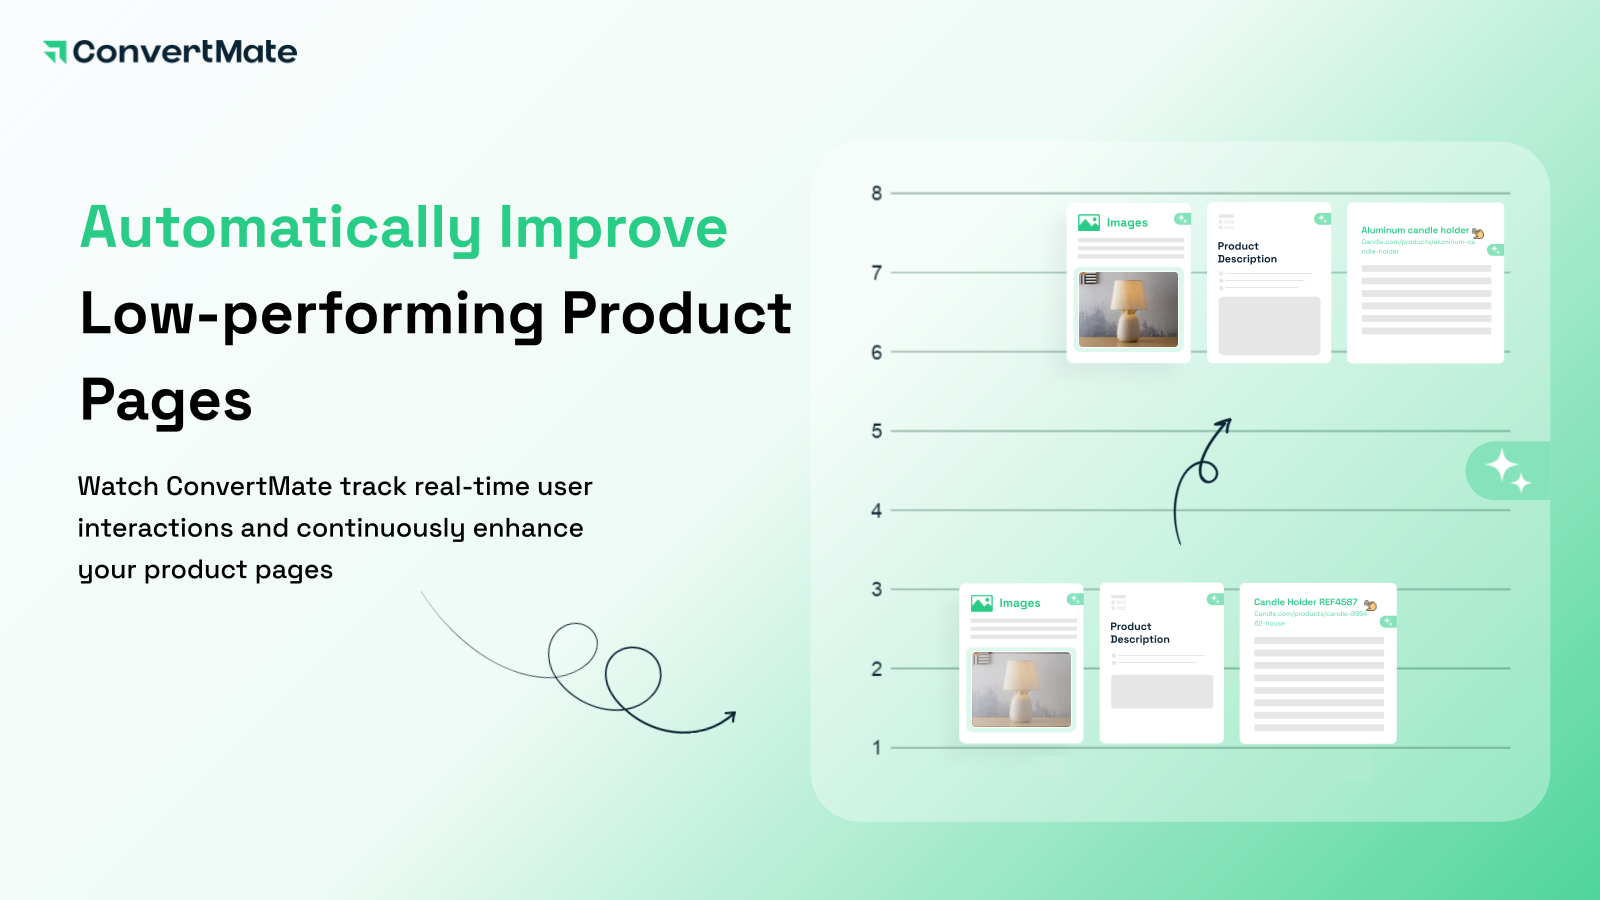 Automatically Improve Low-performing Product Pages